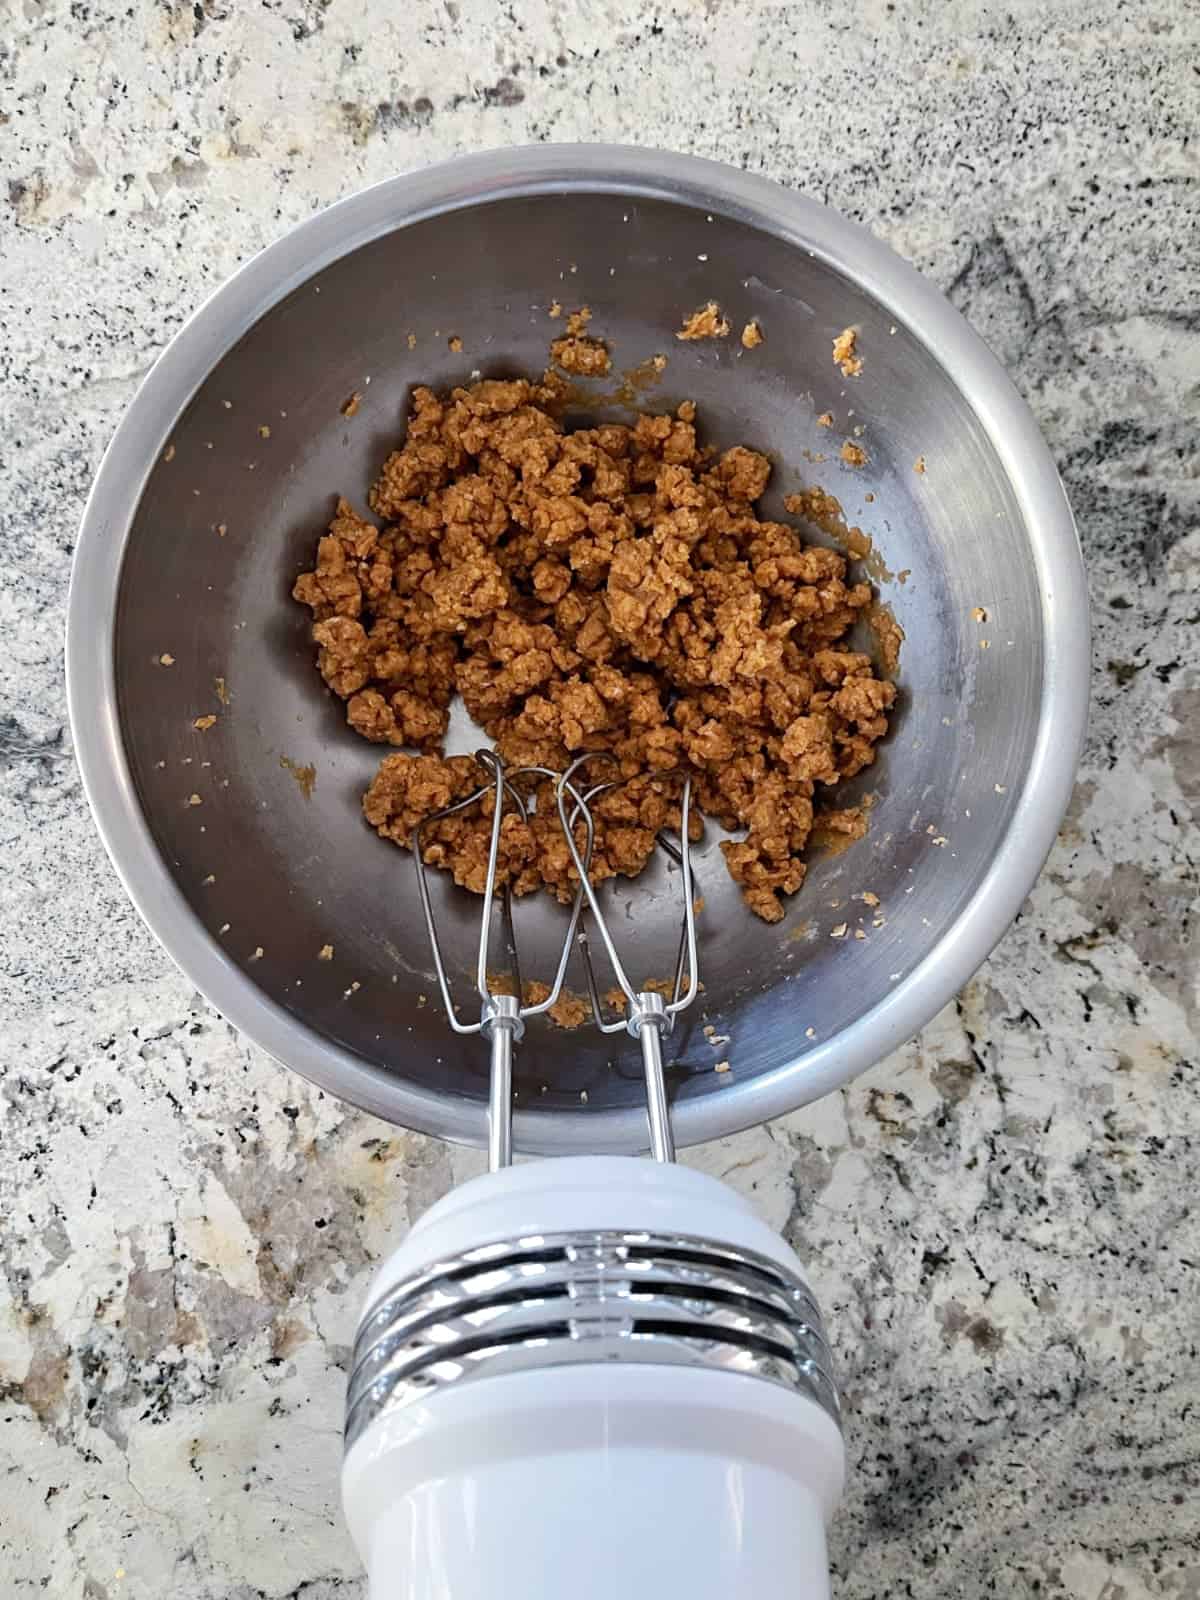 Mixing peanut butter bon bon ingredients in bowl with electric hand mixer.